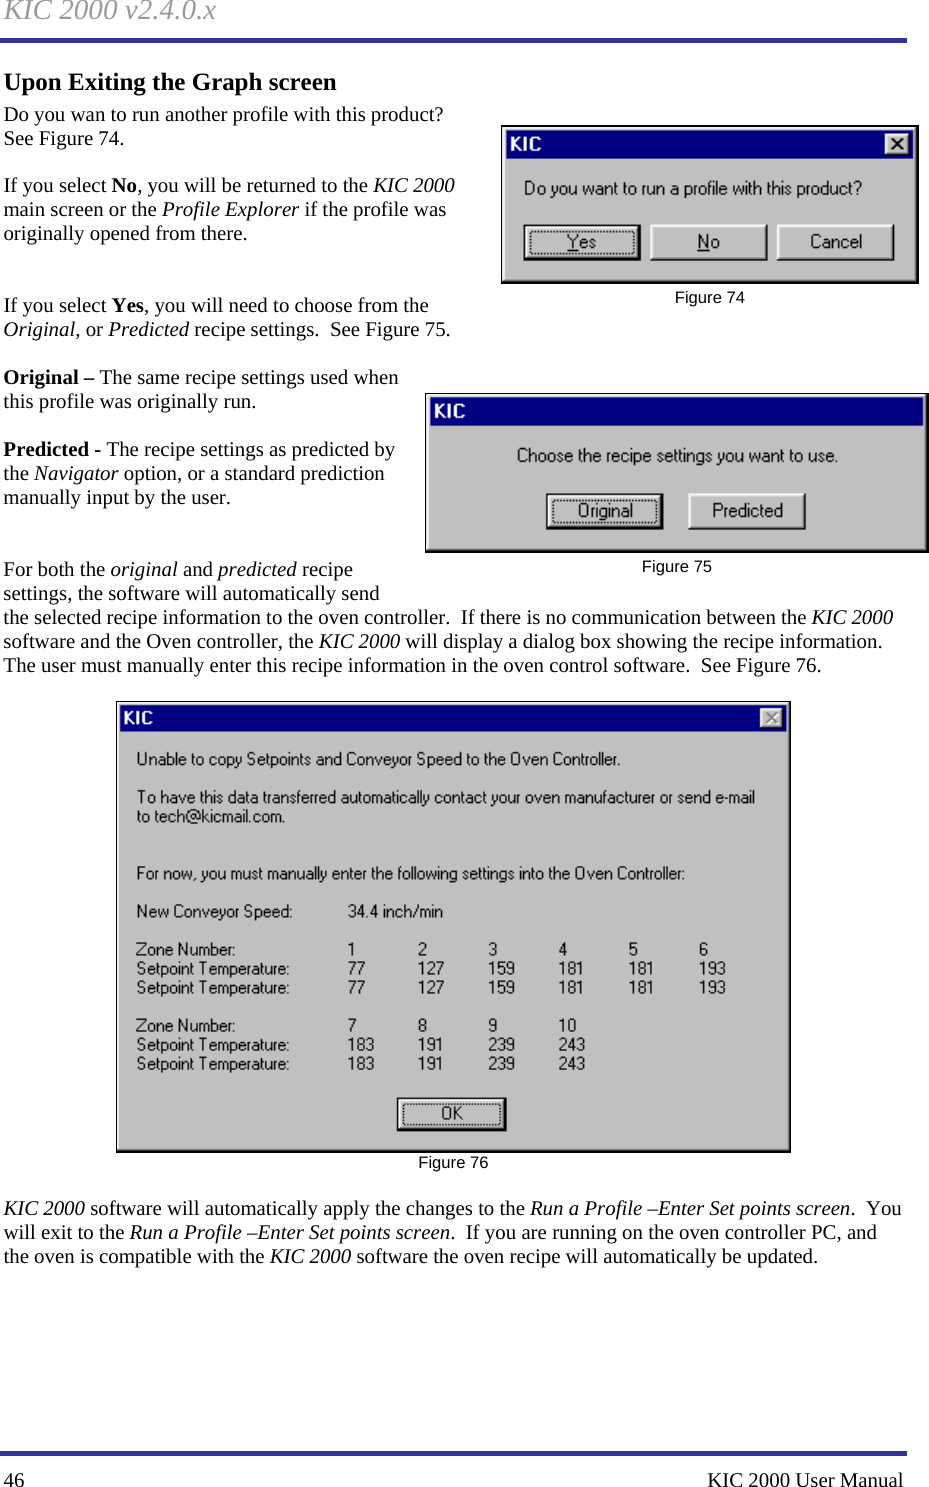 KIC 2000 v2.4.0.x 46    KIC 2000 User Manual Upon Exiting the Graph screen Do you wan to run another profile with this product?  See Figure 74.    If you select No, you will be returned to the KIC 2000 main screen or the Profile Explorer if the profile was originally opened from there.   If you select Yes, you will need to choose from the Original, or Predicted recipe settings.  See Figure 75.    Original – The same recipe settings used when this profile was originally run.  Predicted - The recipe settings as predicted by the Navigator option, or a standard prediction manually input by the user.   For both the original and predicted recipe settings, the software will automatically send the selected recipe information to the oven controller.  If there is no communication between the KIC 2000 software and the Oven controller, the KIC 2000 will display a dialog box showing the recipe information.  The user must manually enter this recipe information in the oven control software.  See Figure 76.     Figure 76  KIC 2000 software will automatically apply the changes to the Run a Profile –Enter Set points screen.  You will exit to the Run a Profile –Enter Set points screen.  If you are running on the oven controller PC, and the oven is compatible with the KIC 2000 software the oven recipe will automatically be updated.     Figure 74  Figure 75 